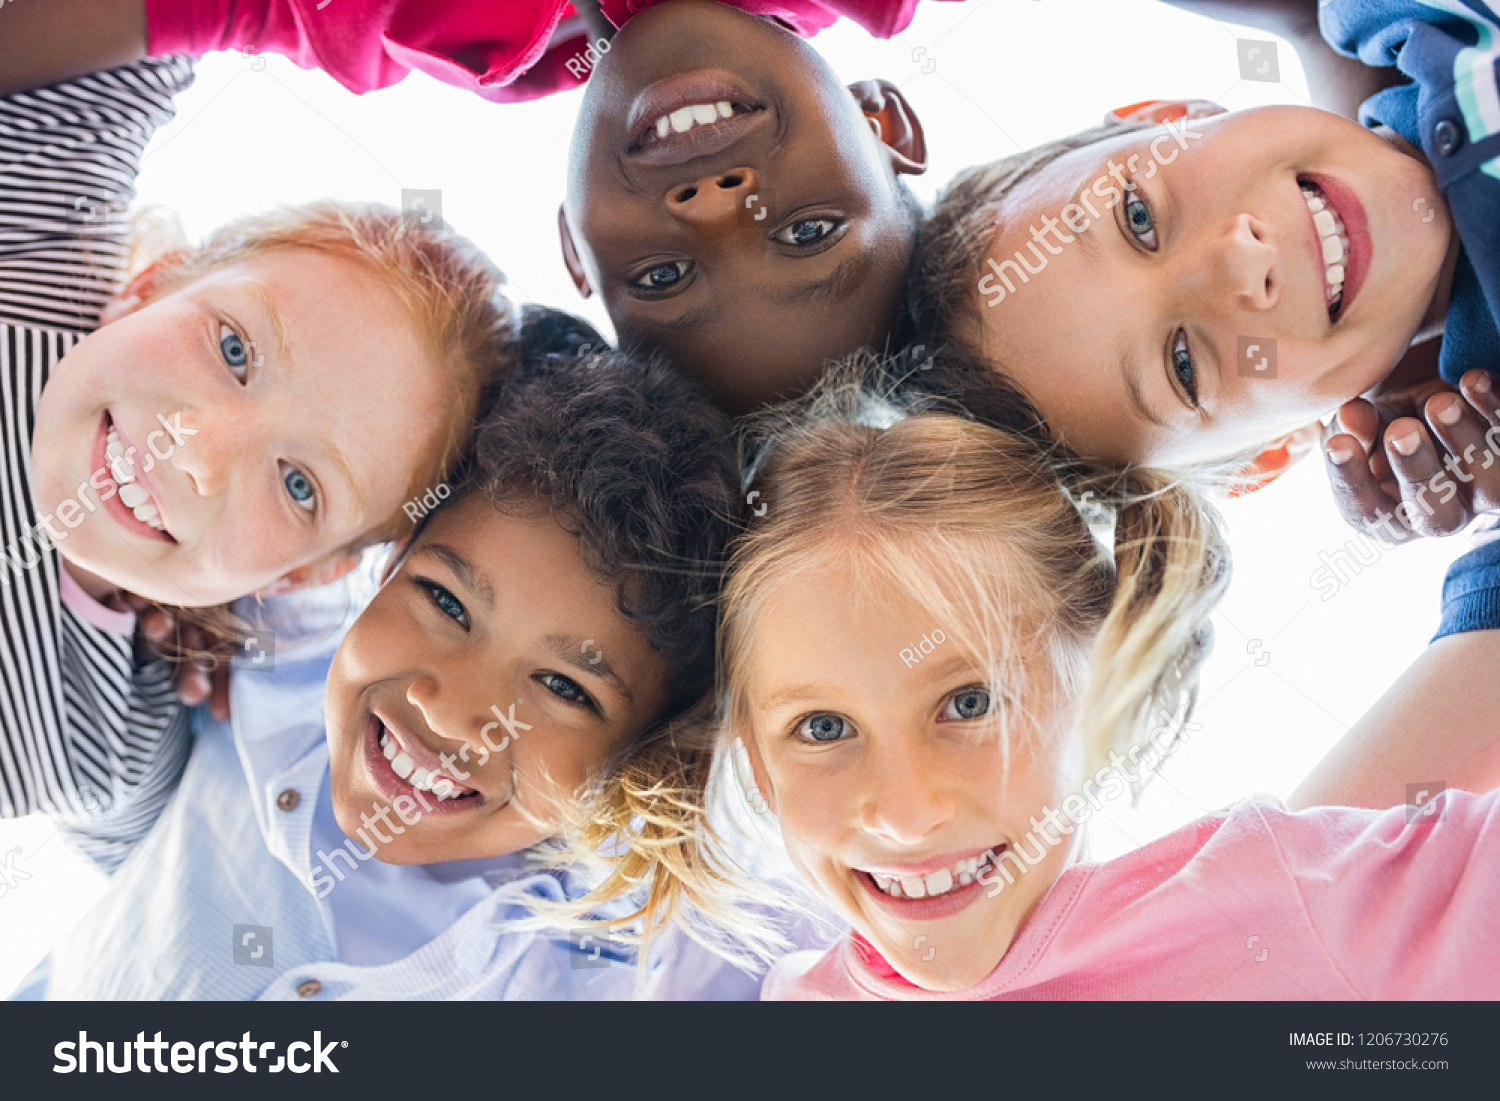 Closeup face of happy multiethnic children embracing each other and smiling at camera. Team of smiling kids embracing together in a circle. Portrait of young boy and pretty girls looking at camera. #1206730276